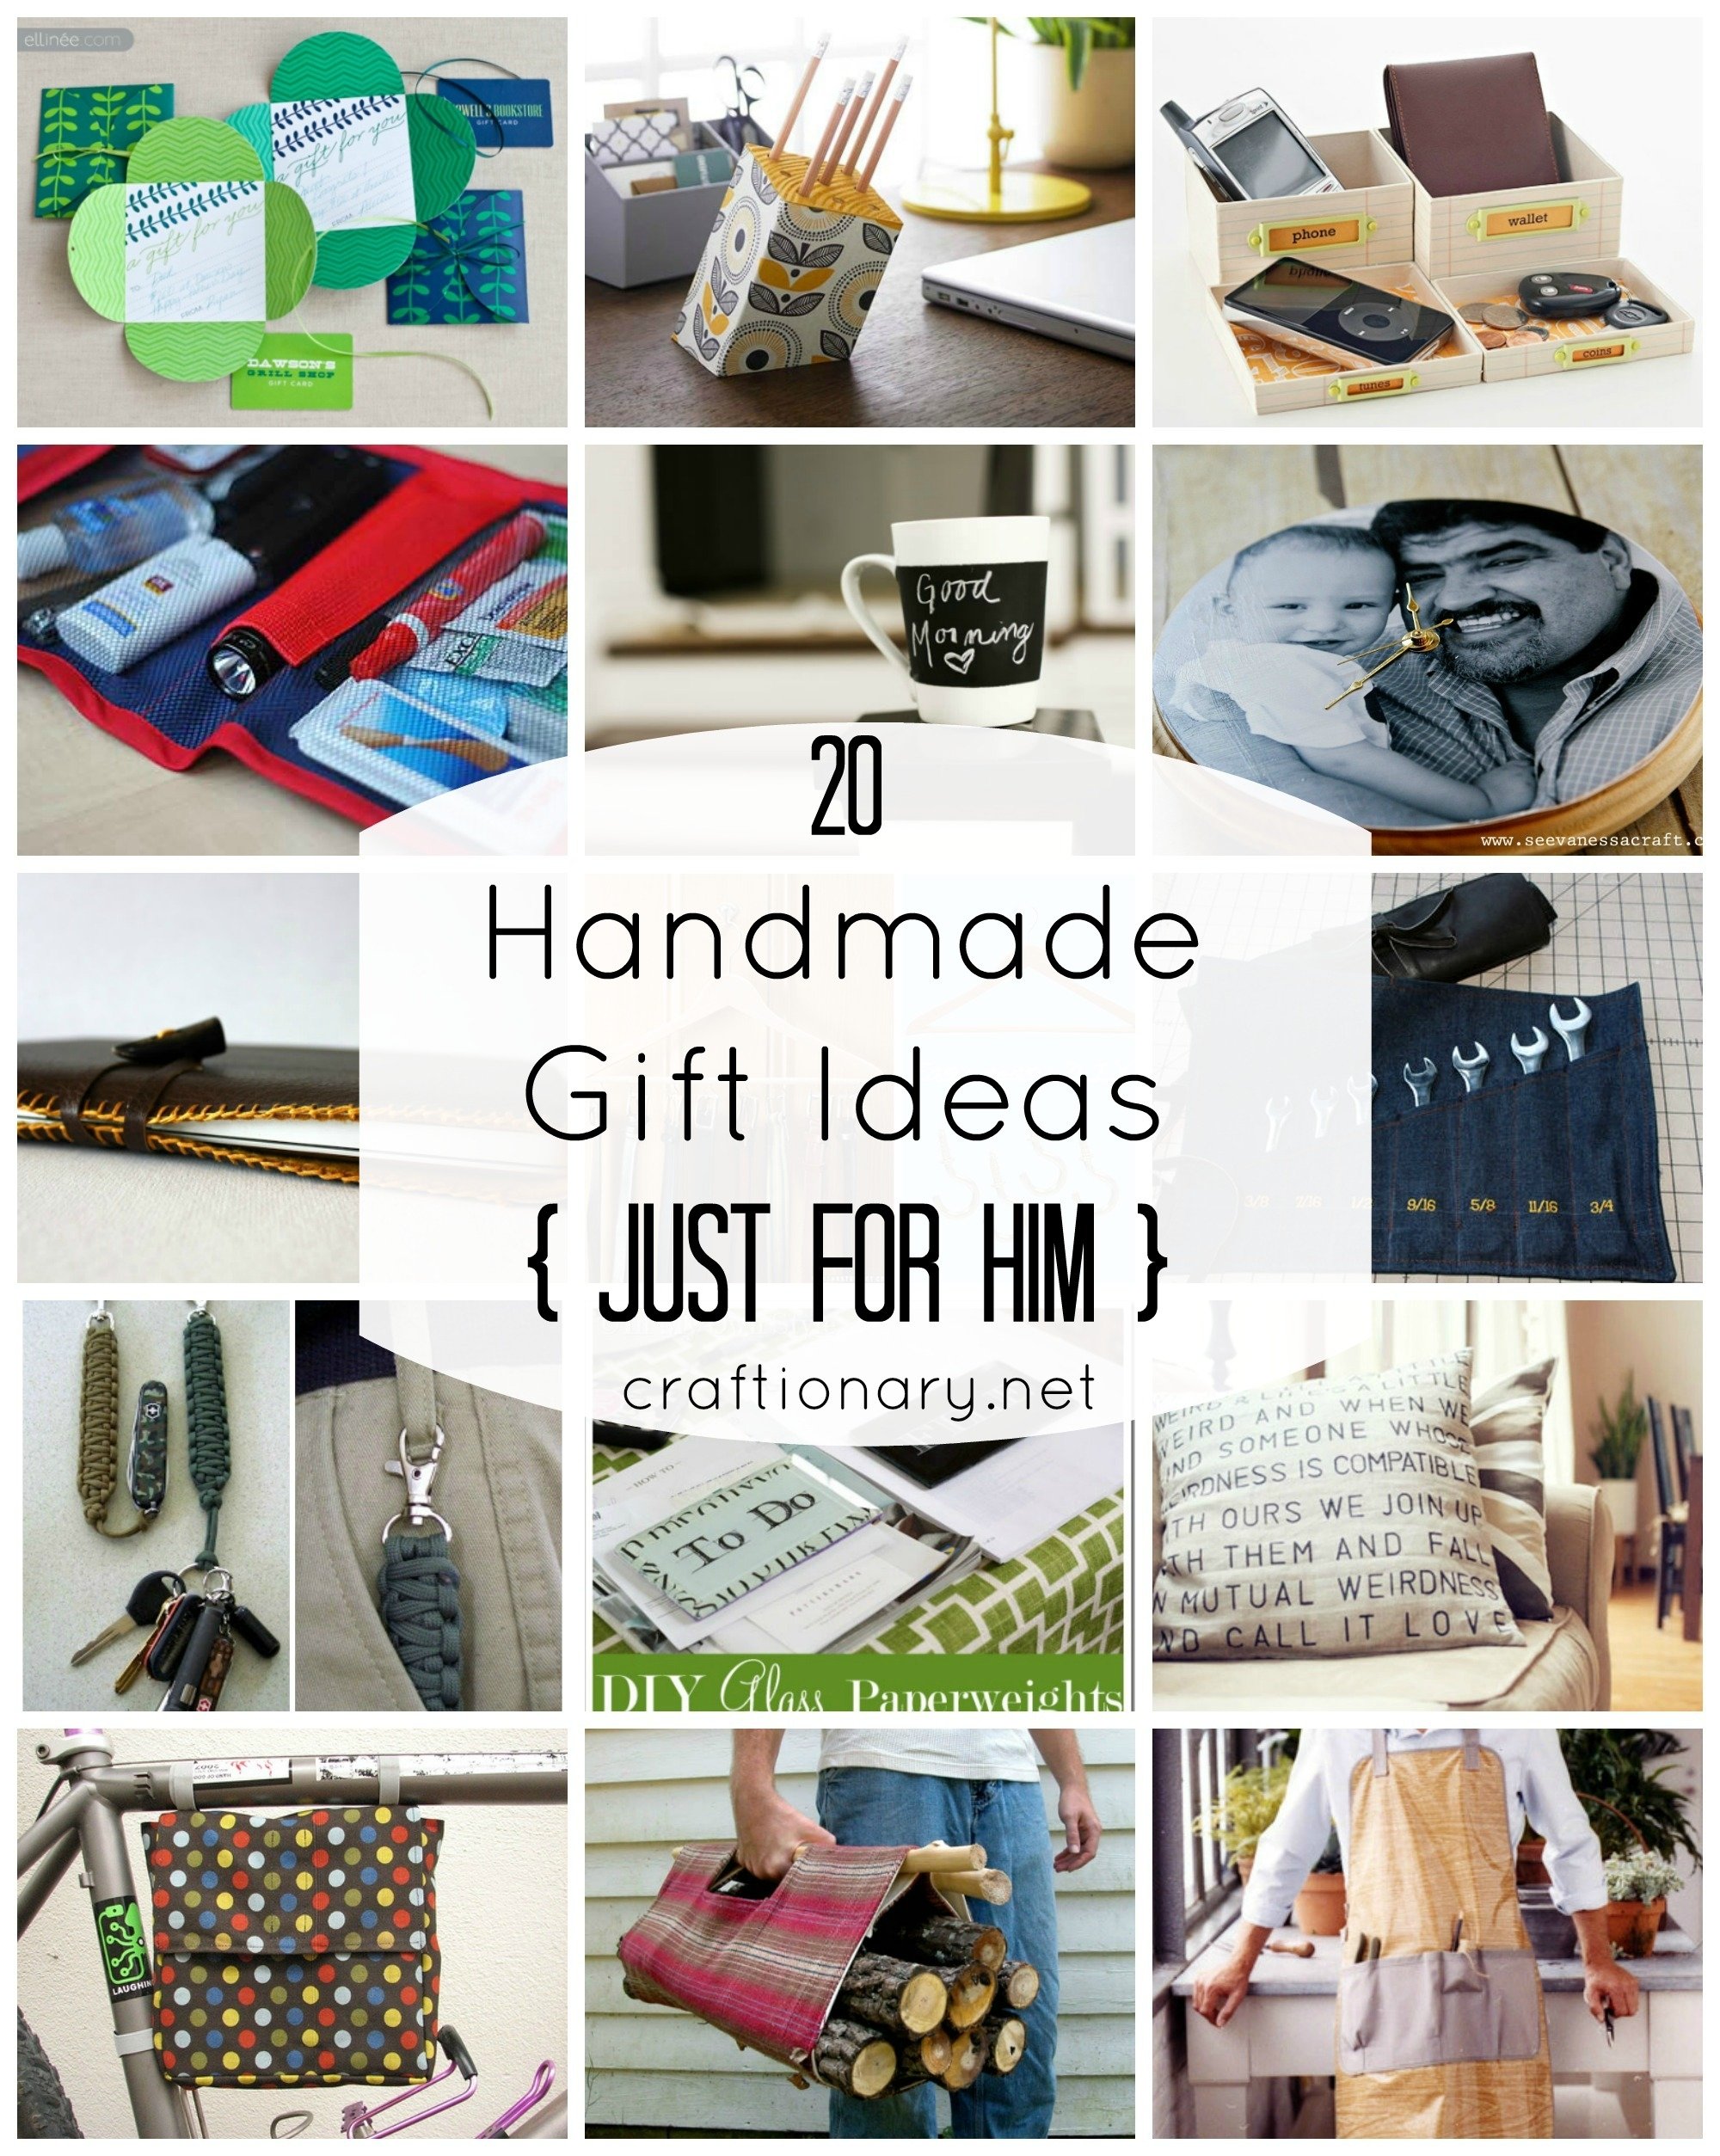 10 Amazing Homemade Gift Ideas For Boys gifts design ideas simple creation homemade gift ideas for men best 1 2023